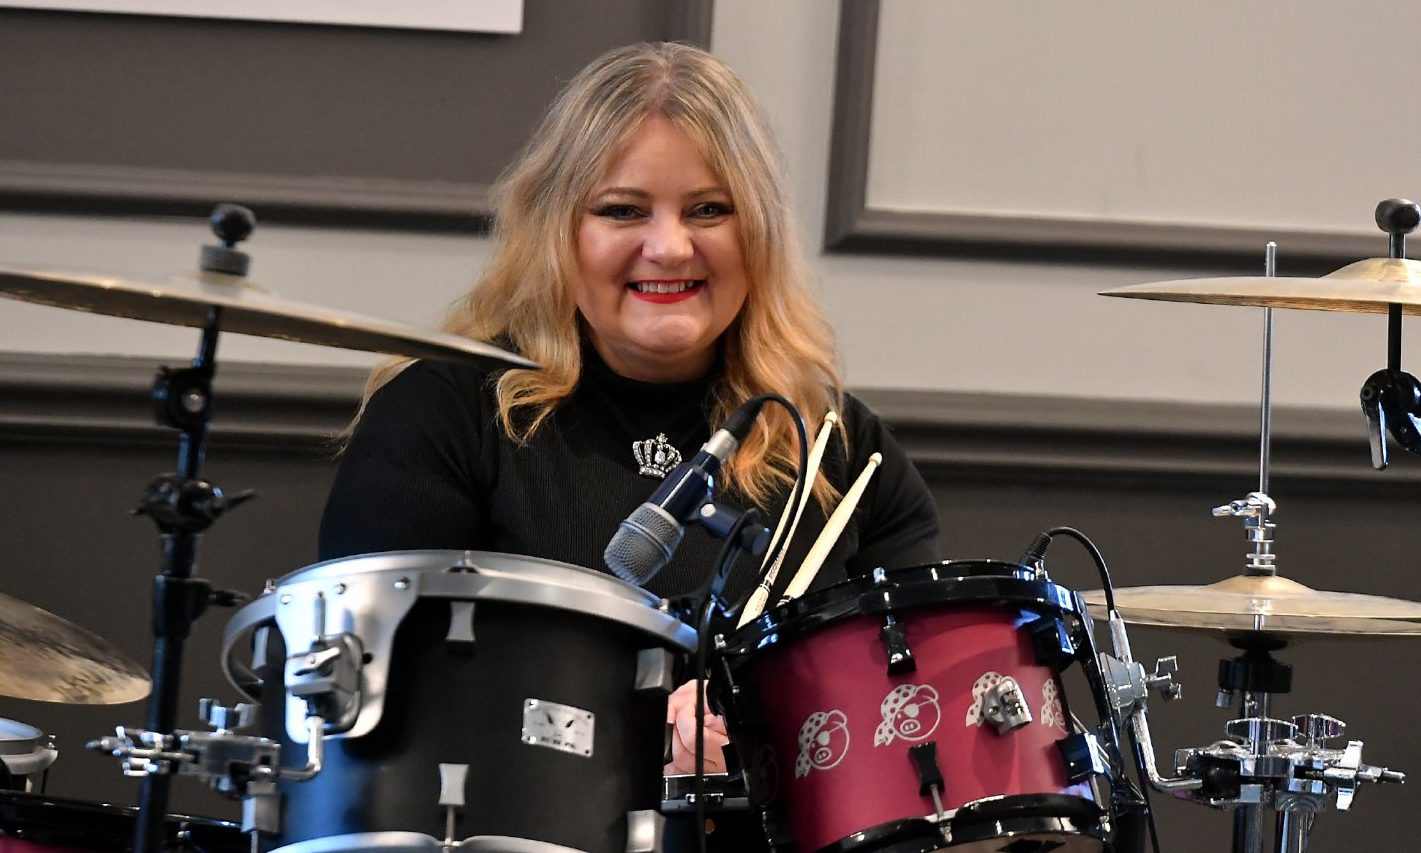 Mairi Newberry has been performing as a drummer on the north-east events scene since she was 12.